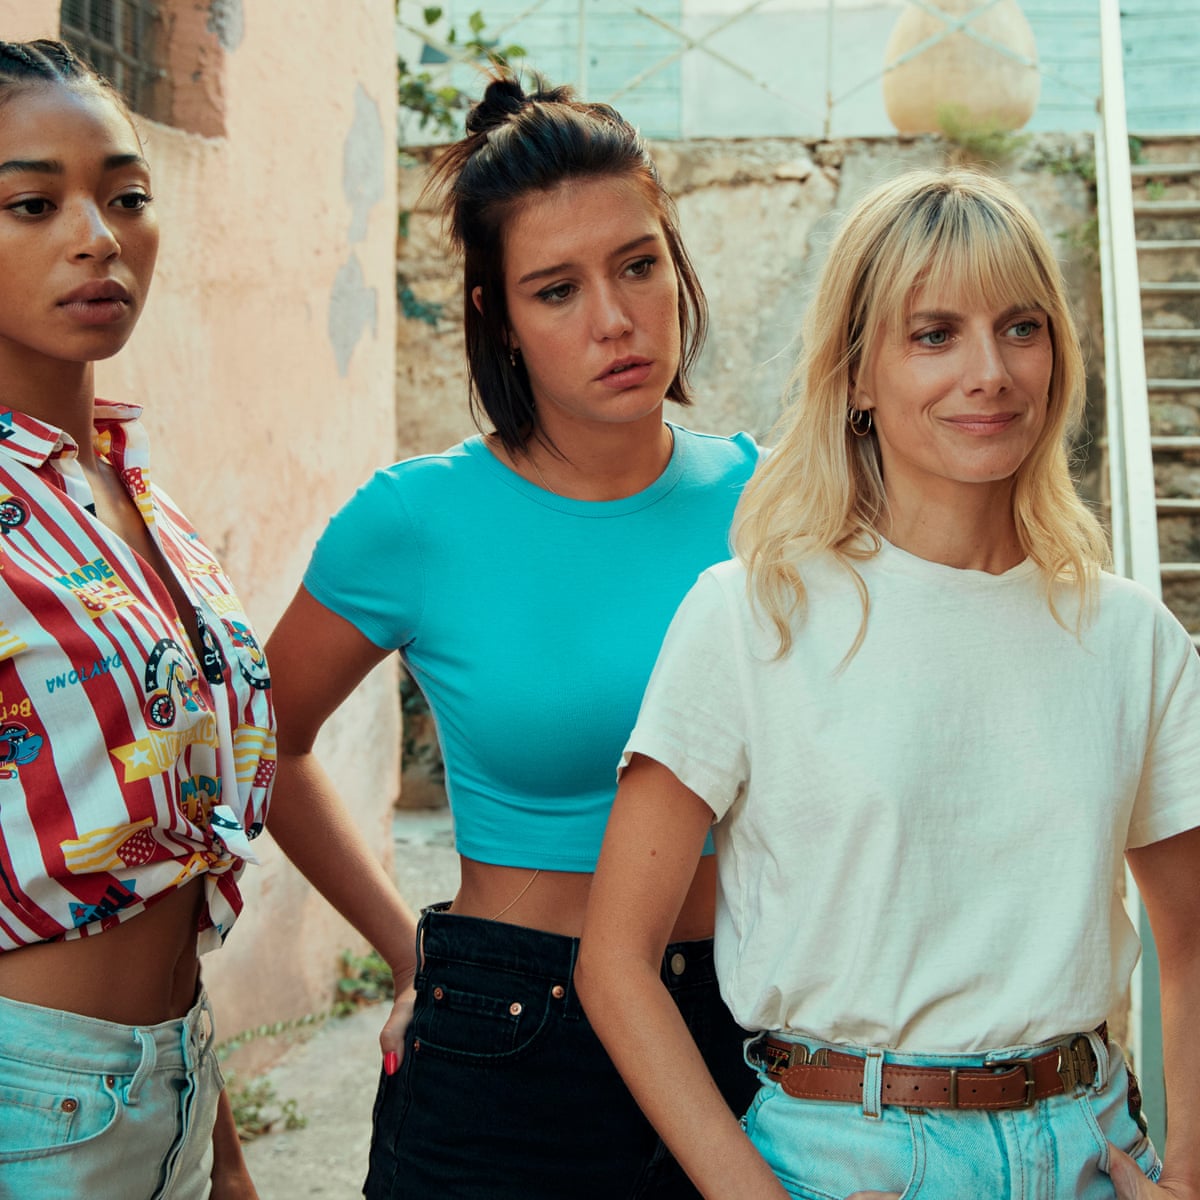 Wingwomen review – French Netflix crime comedy has a cop-out ending, Comedy films